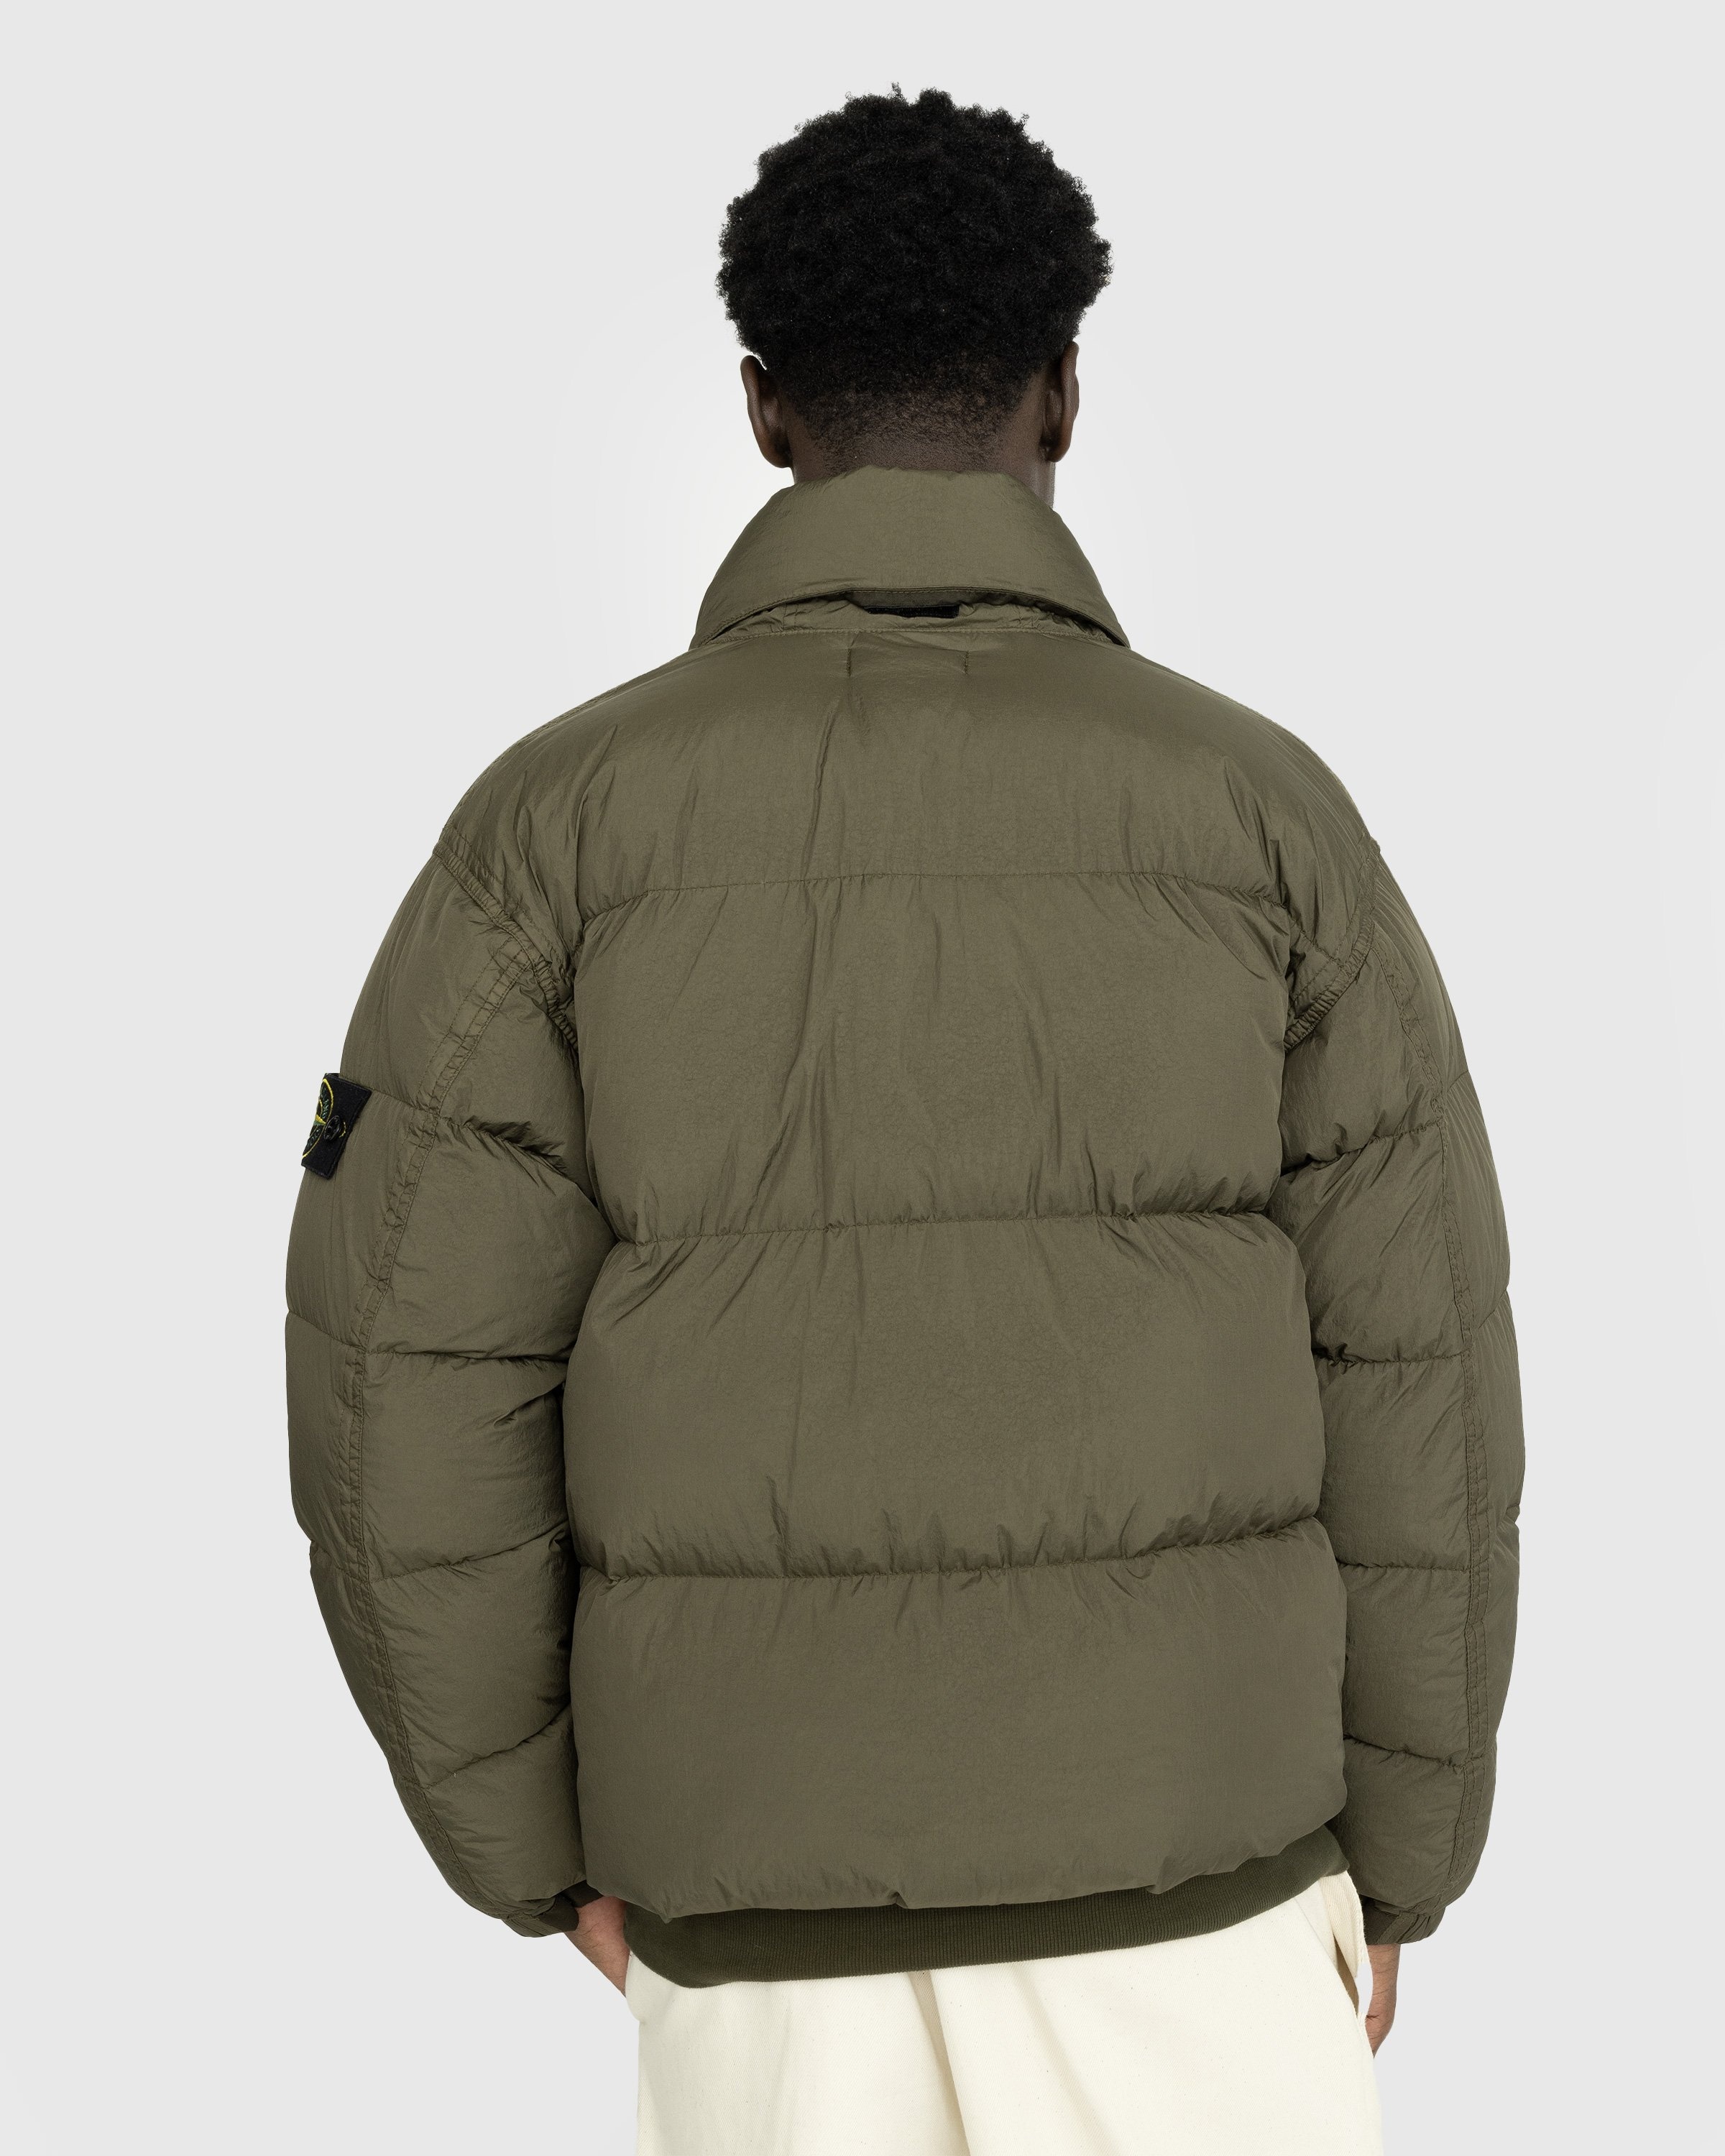 Stone Island – Garment-Dyed Recycled Nylon Down Jacket Olive - Outerwear - Green - Image 3